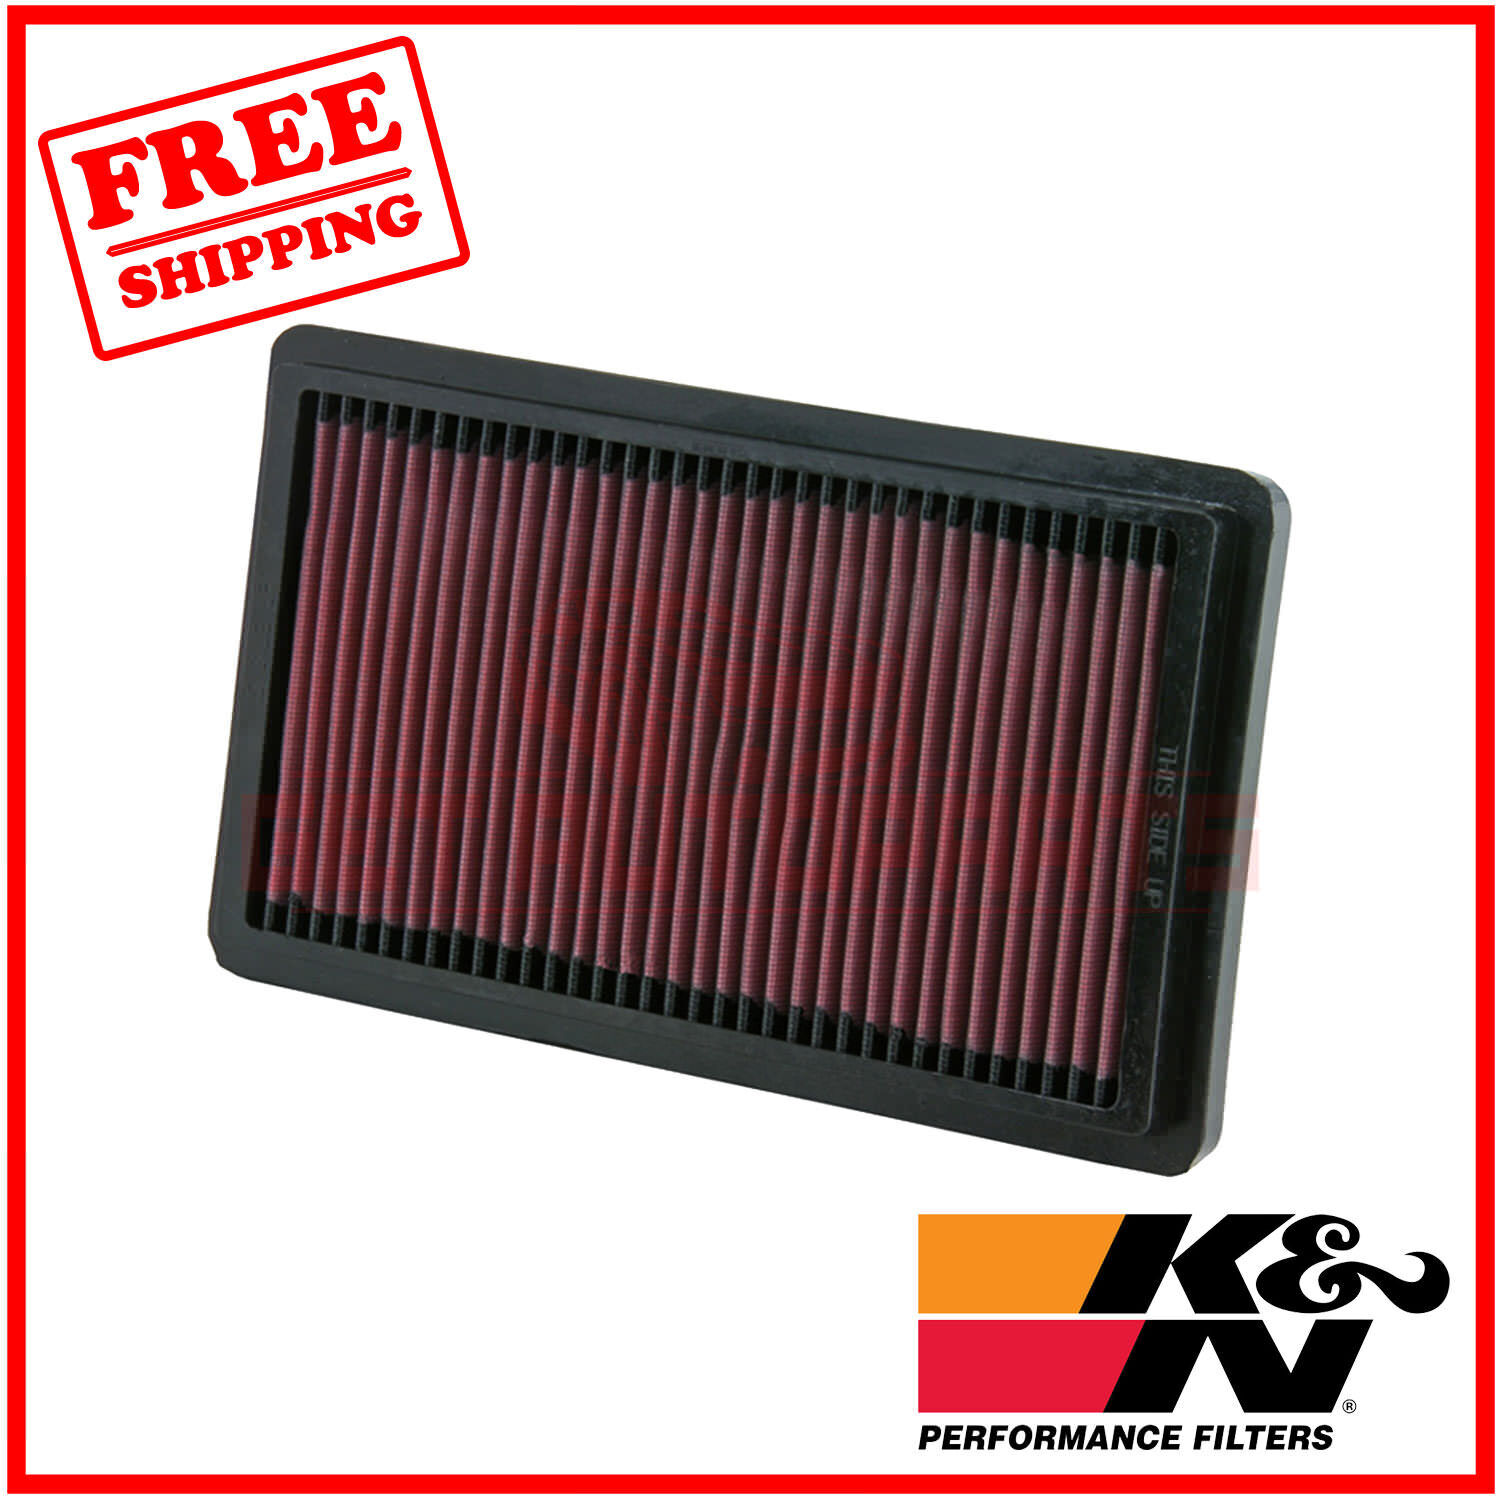 K&N Replacement Air Filter for BMW 318i 1984-1985